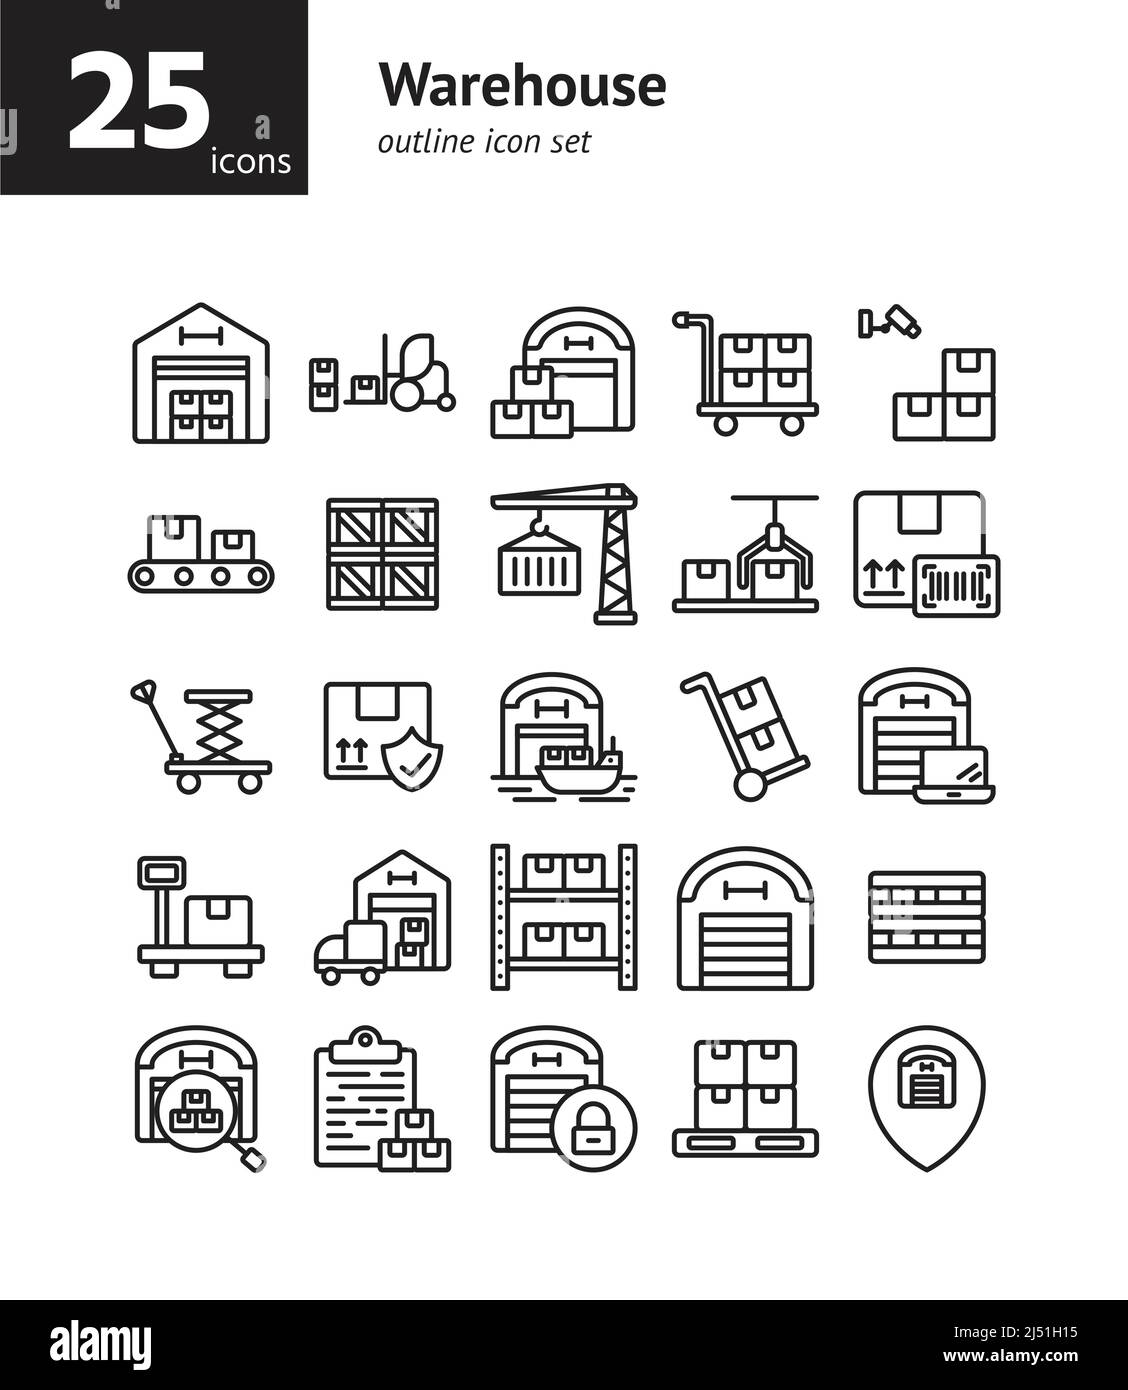 Warehouse outline icon set. Vector and Illustration. Stock Vector